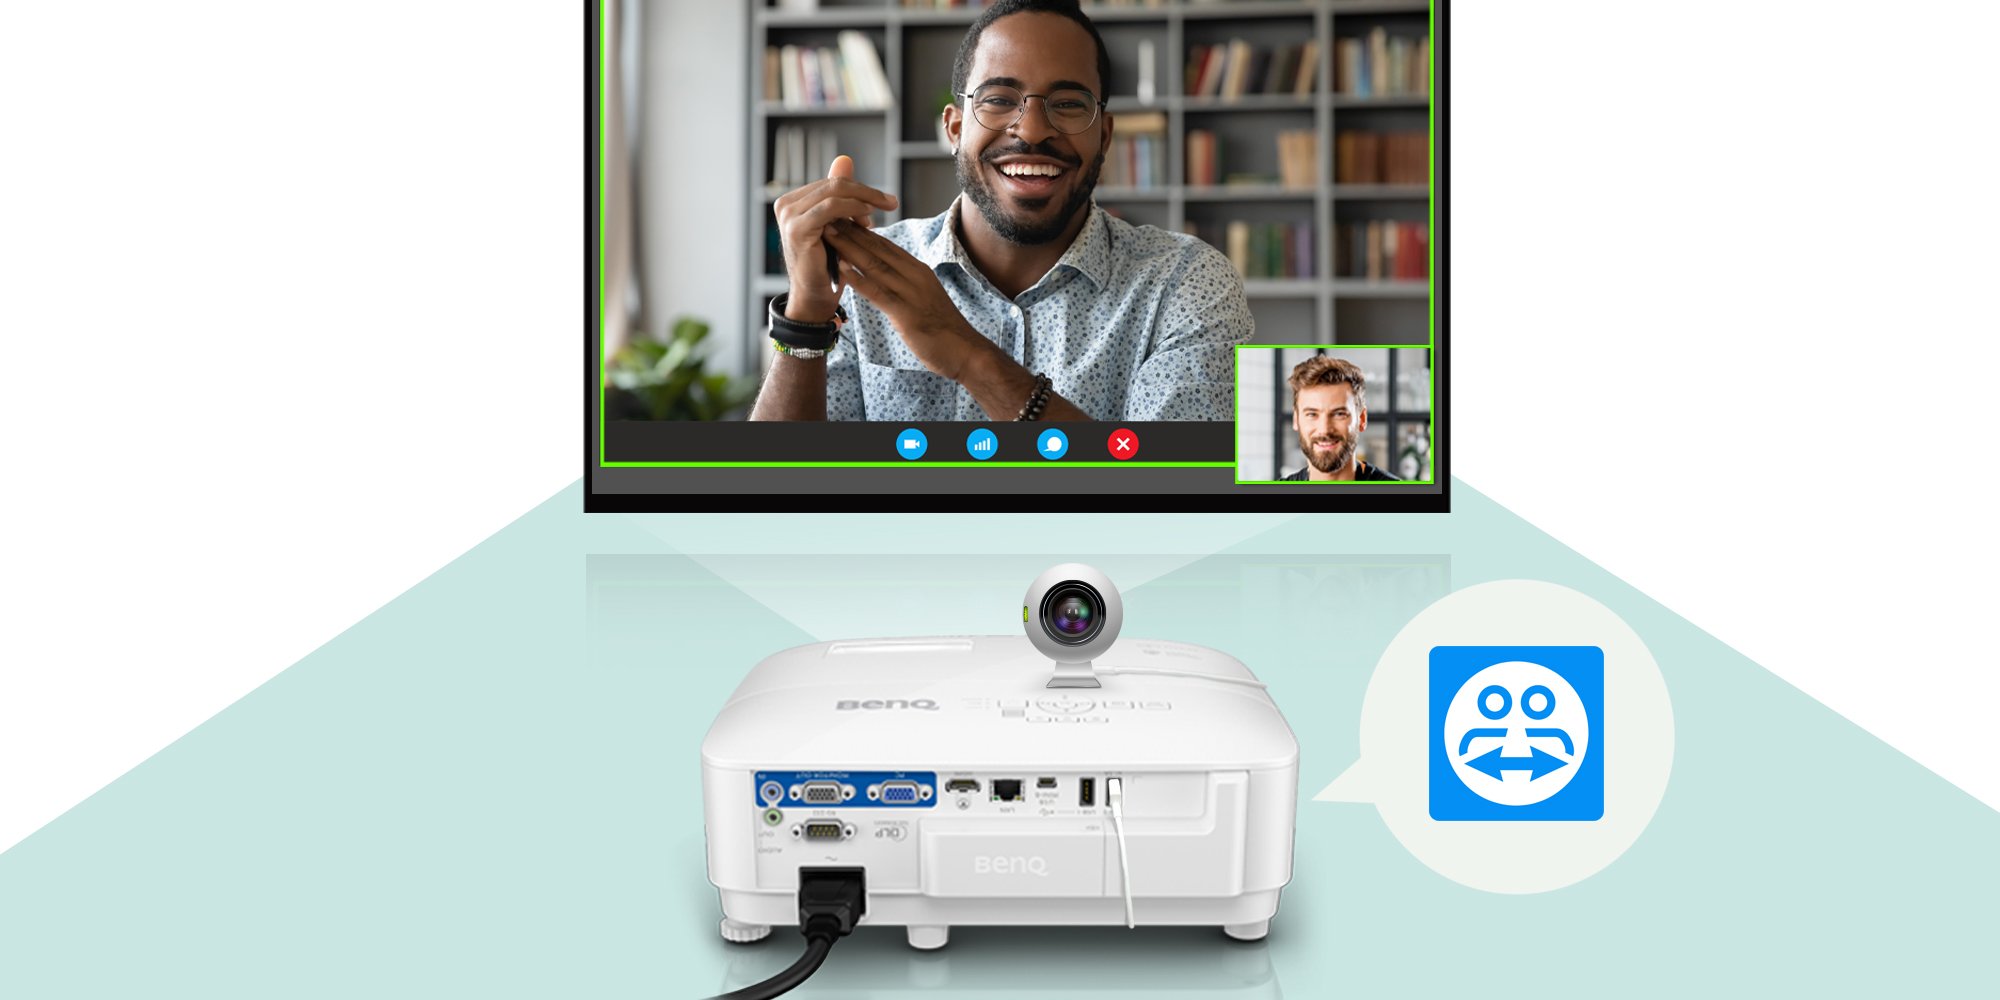 BenQ EX800ST smart projector for business enables software and hardware integration for starting remote meetings immediately.